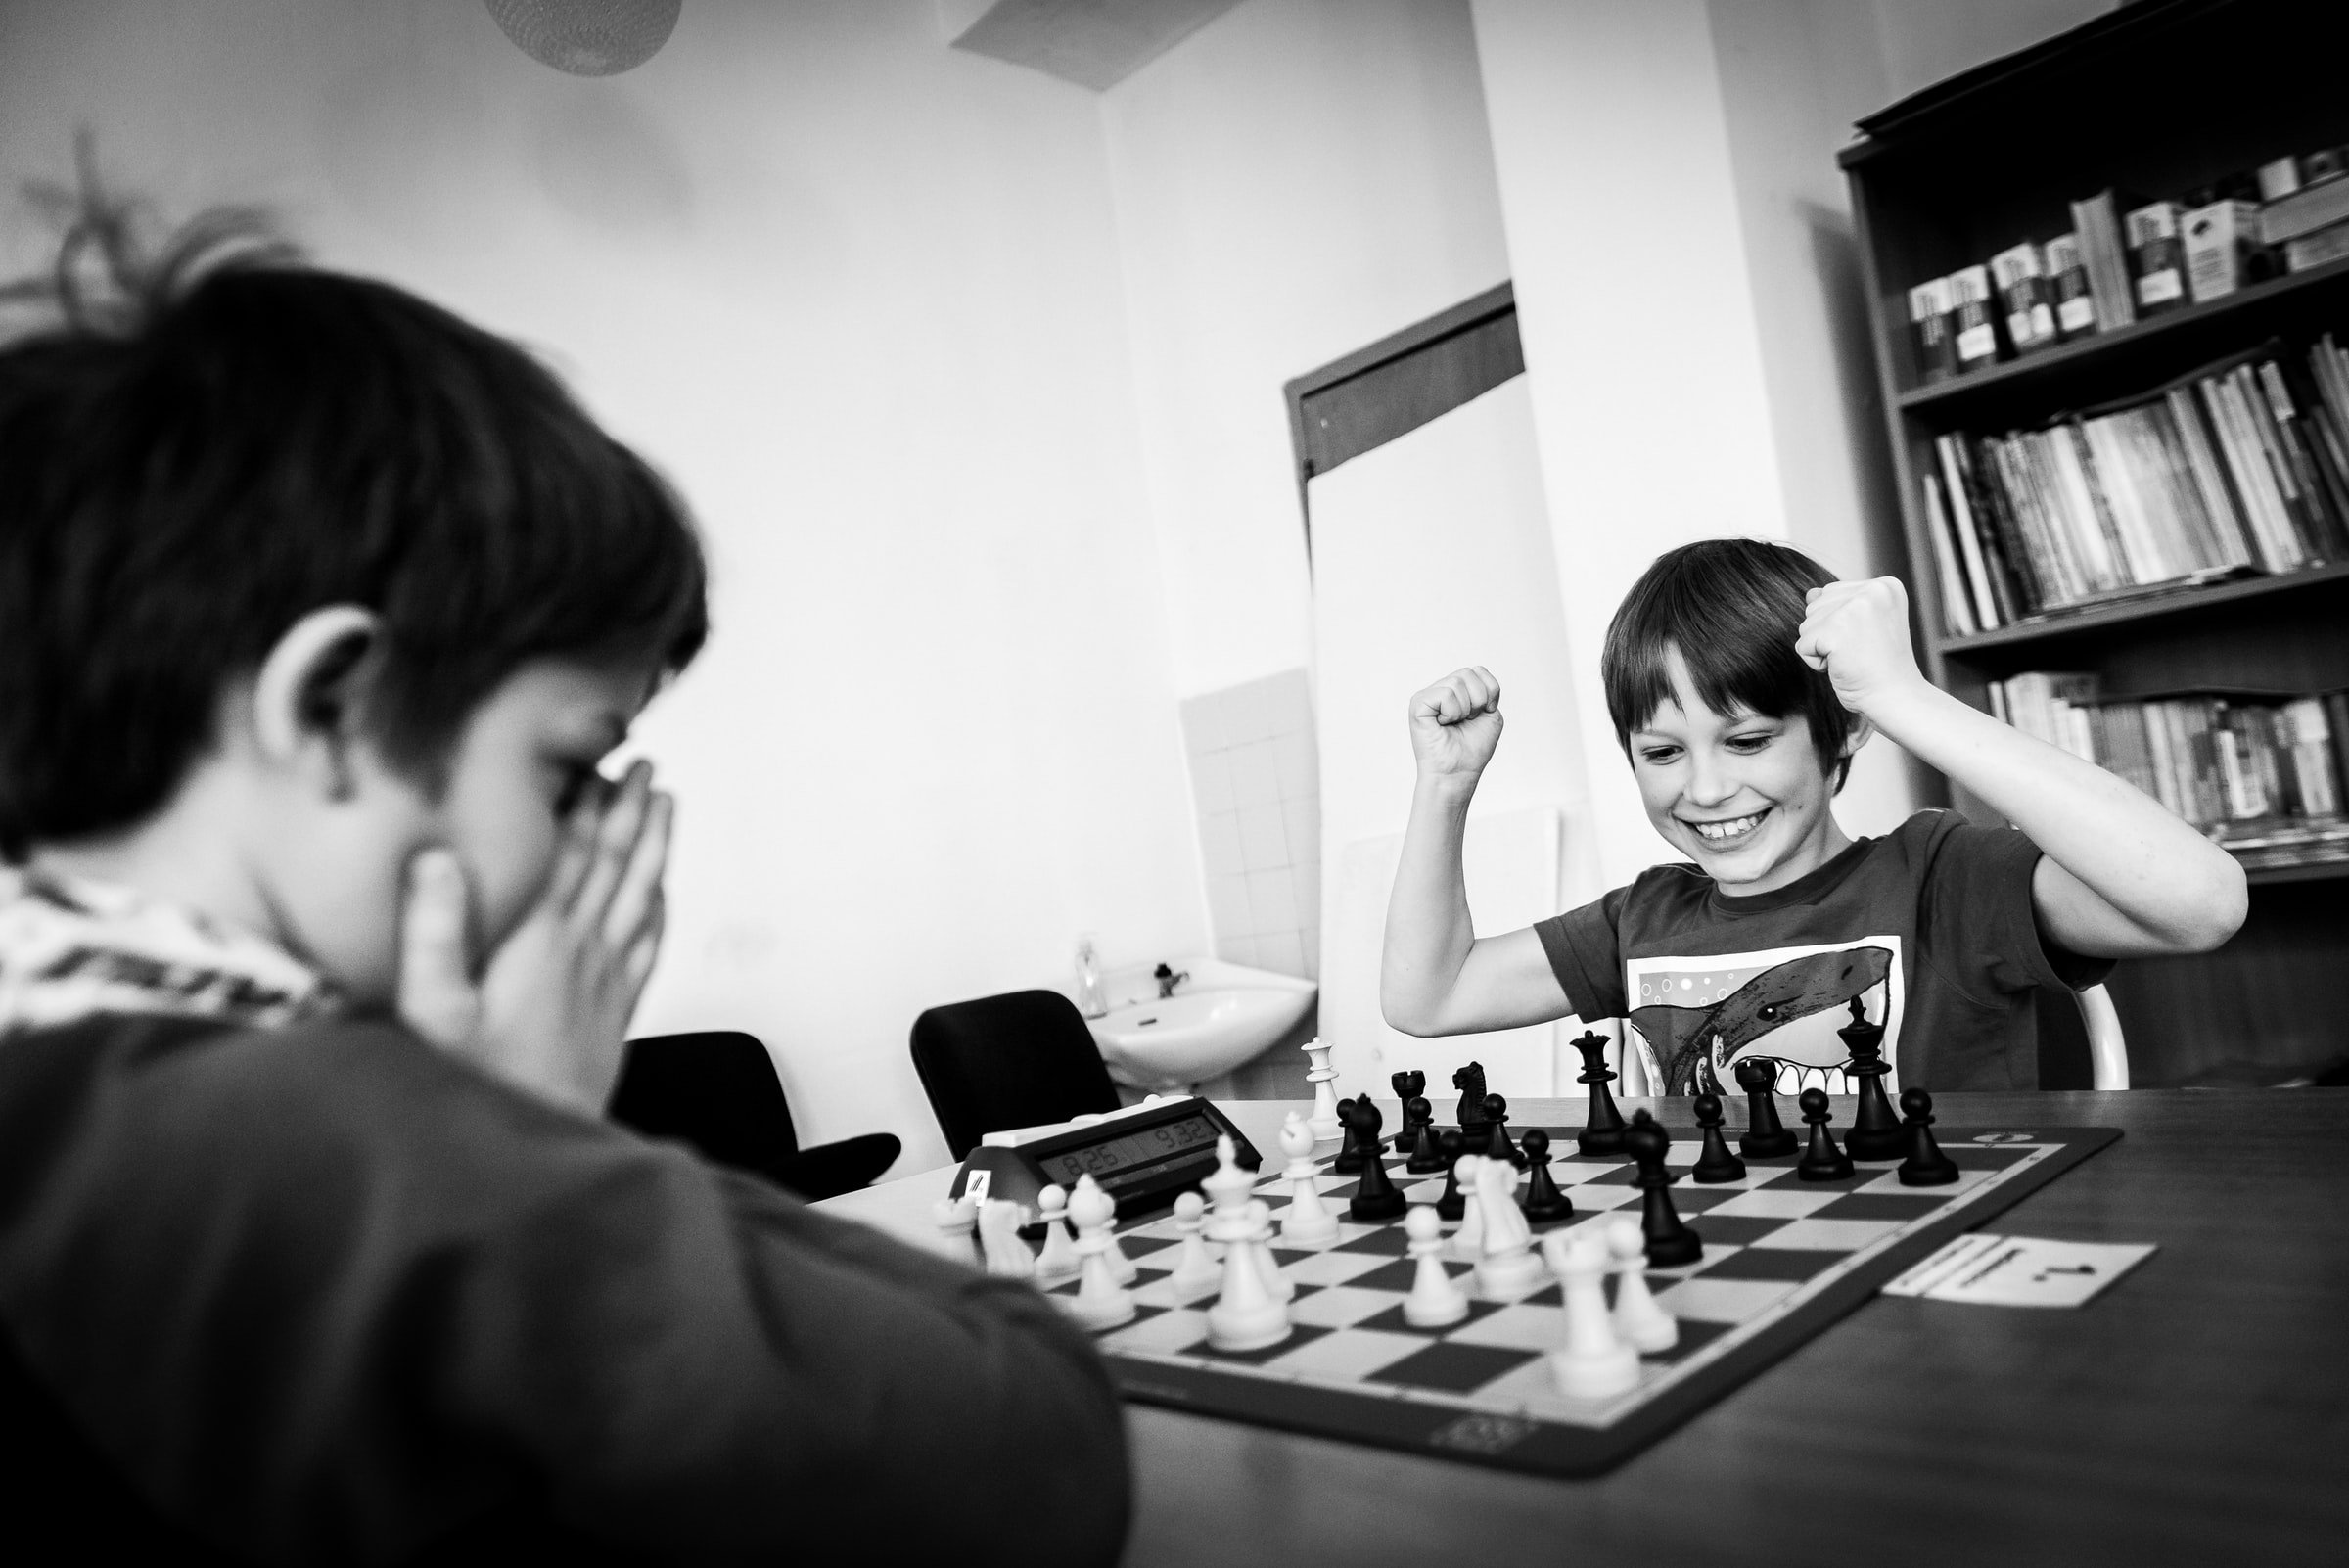 Student enjoying playing chess as they win